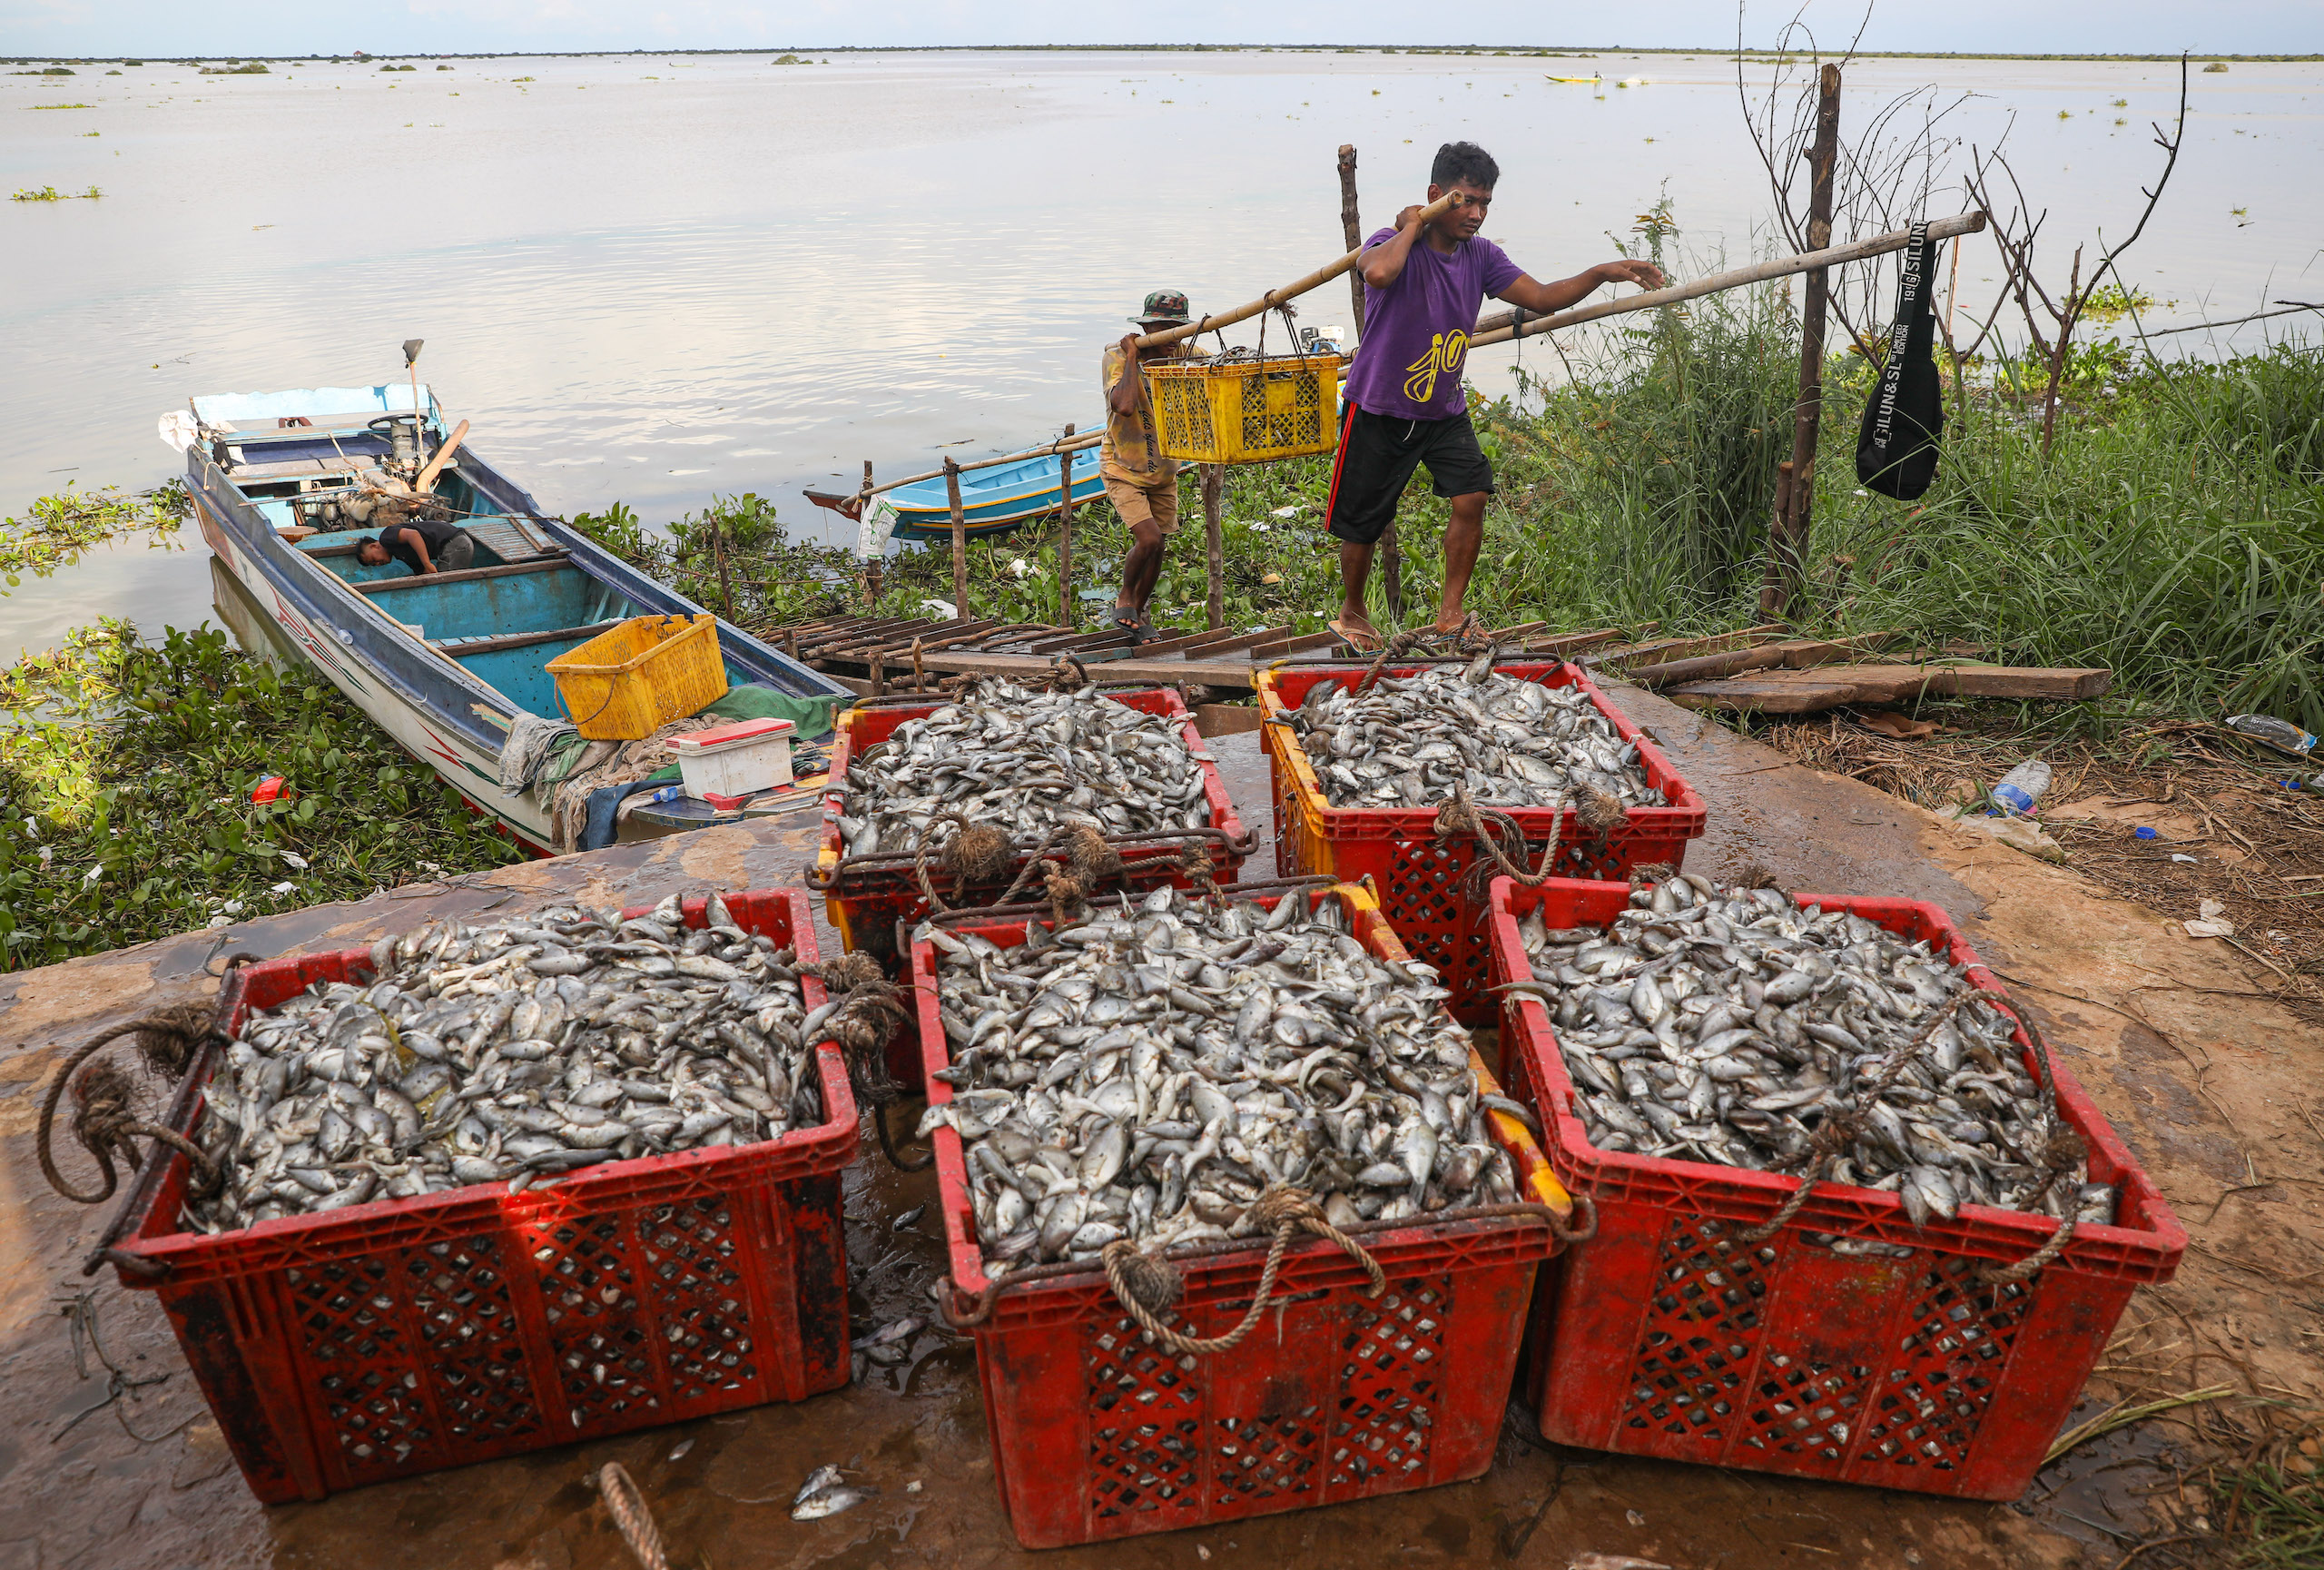 A morning’s worth of fish is unloaded onto the shores of Kampong Khleang